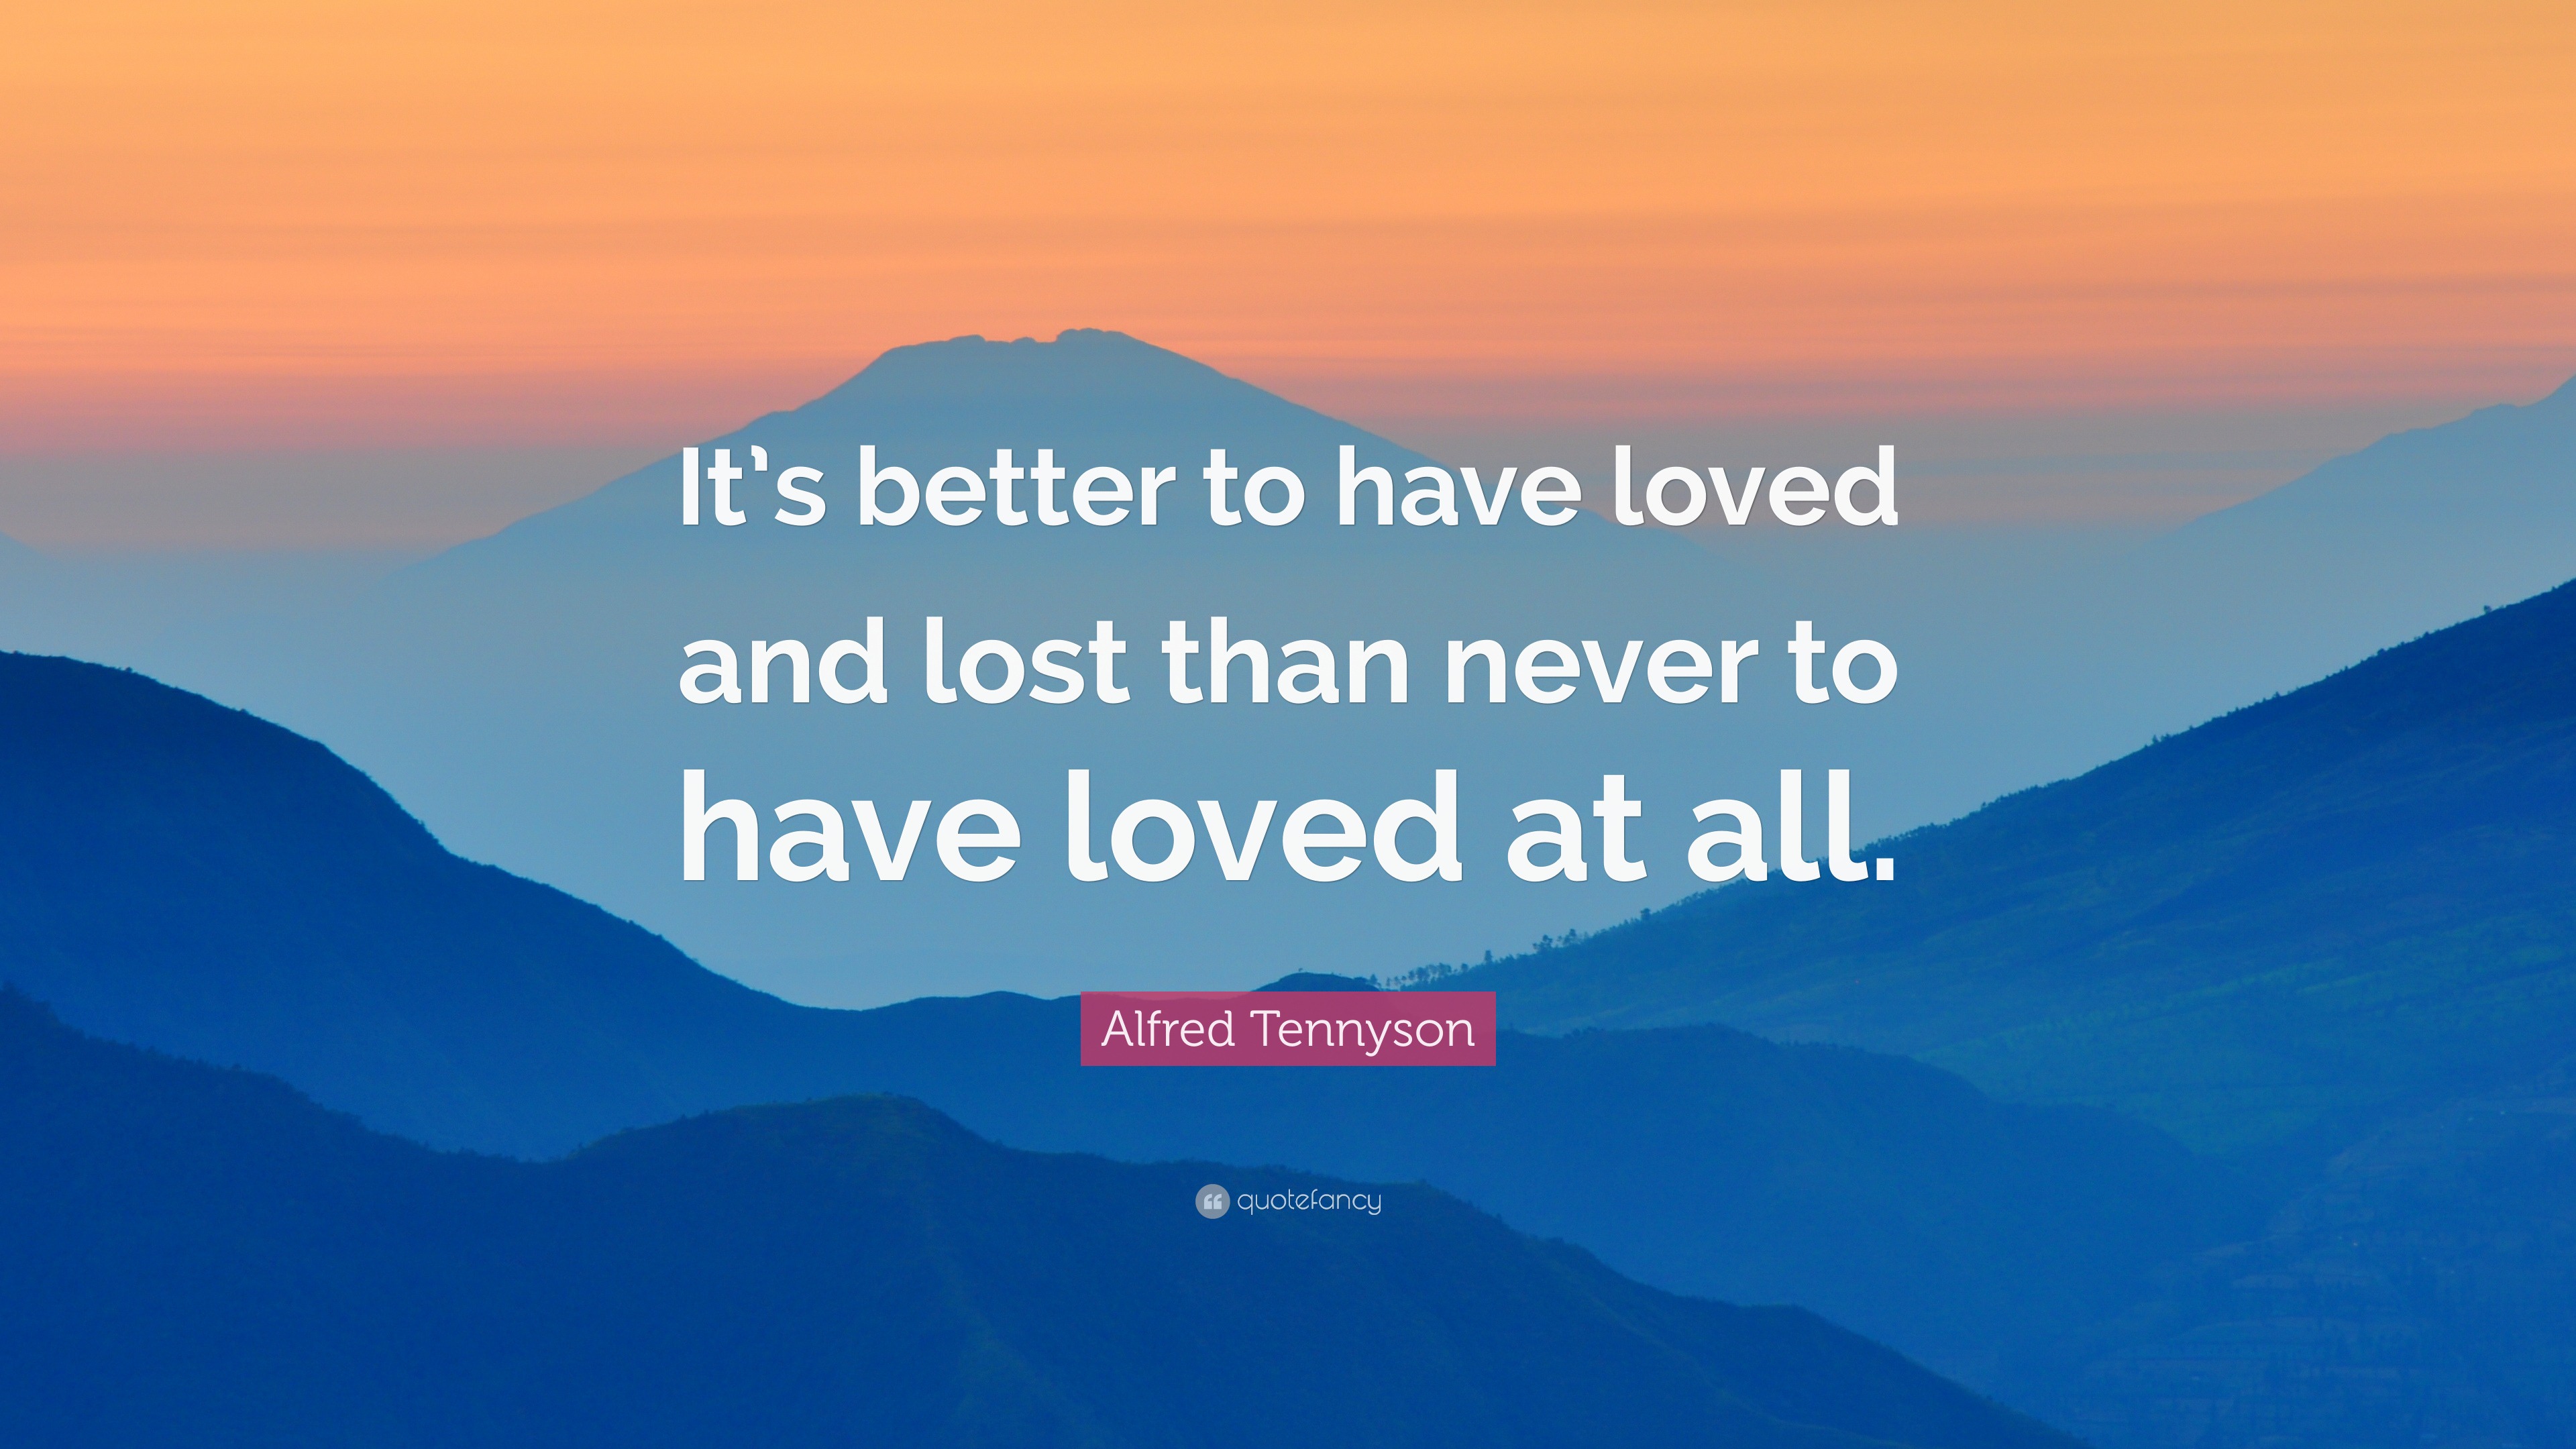 Alfred Tennyson Quote: “It’s better to have loved and lost than never